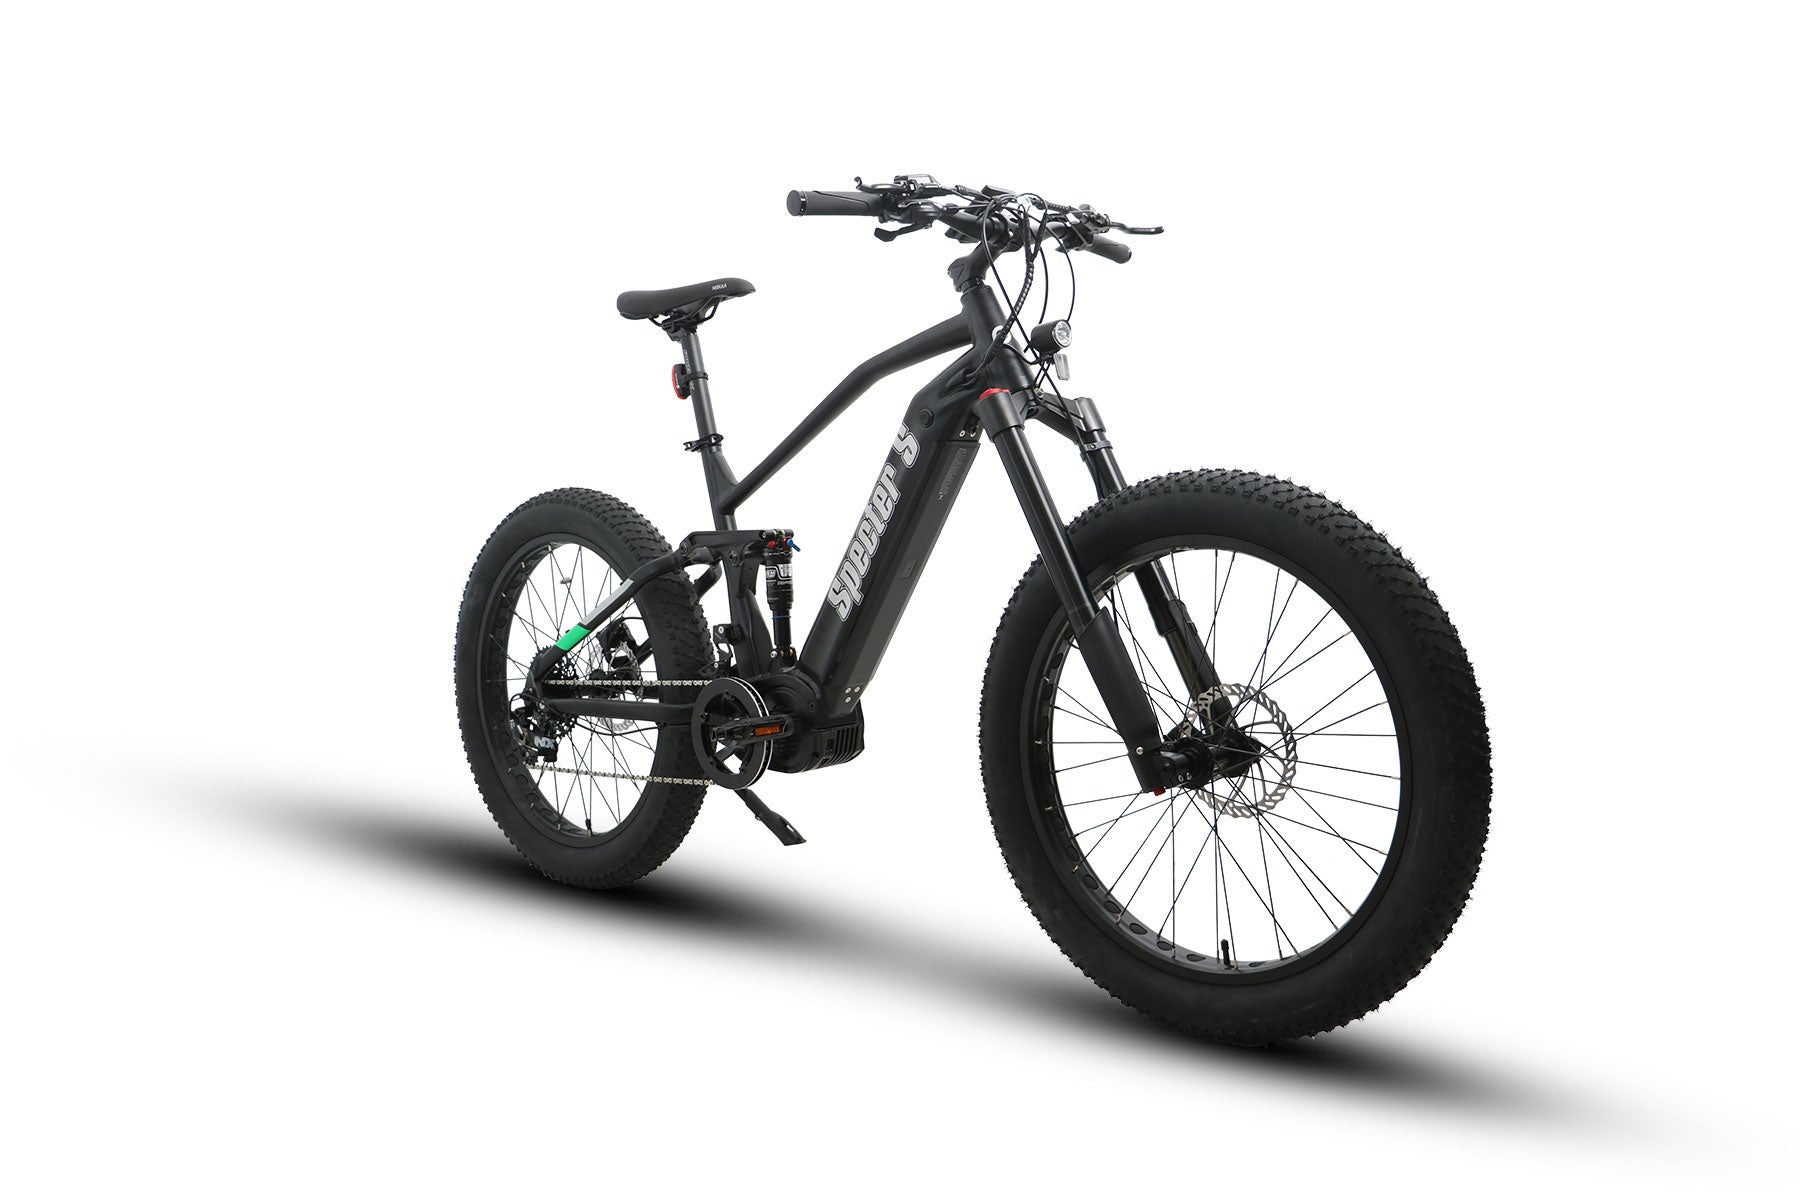 EUNORAU Specter-S E-Bike with Bafang G510(M620) Motor DNM Suspension Looking for an eBike that can take on any trail with maximum comfort and control? Look no further than the EUNORAU SPECTER-S 2023 Electric Bike, the ultimate eBike for rough and varied conditions.  The core of the Specter’s power is the Bafang G510(M620) motor, which is the flagship of Bafang’s lineup. With its mid-drive, 1000w, torque sensor, and 160 N.m torque, this motor has great balance, power, utility, and feels intuitive. 